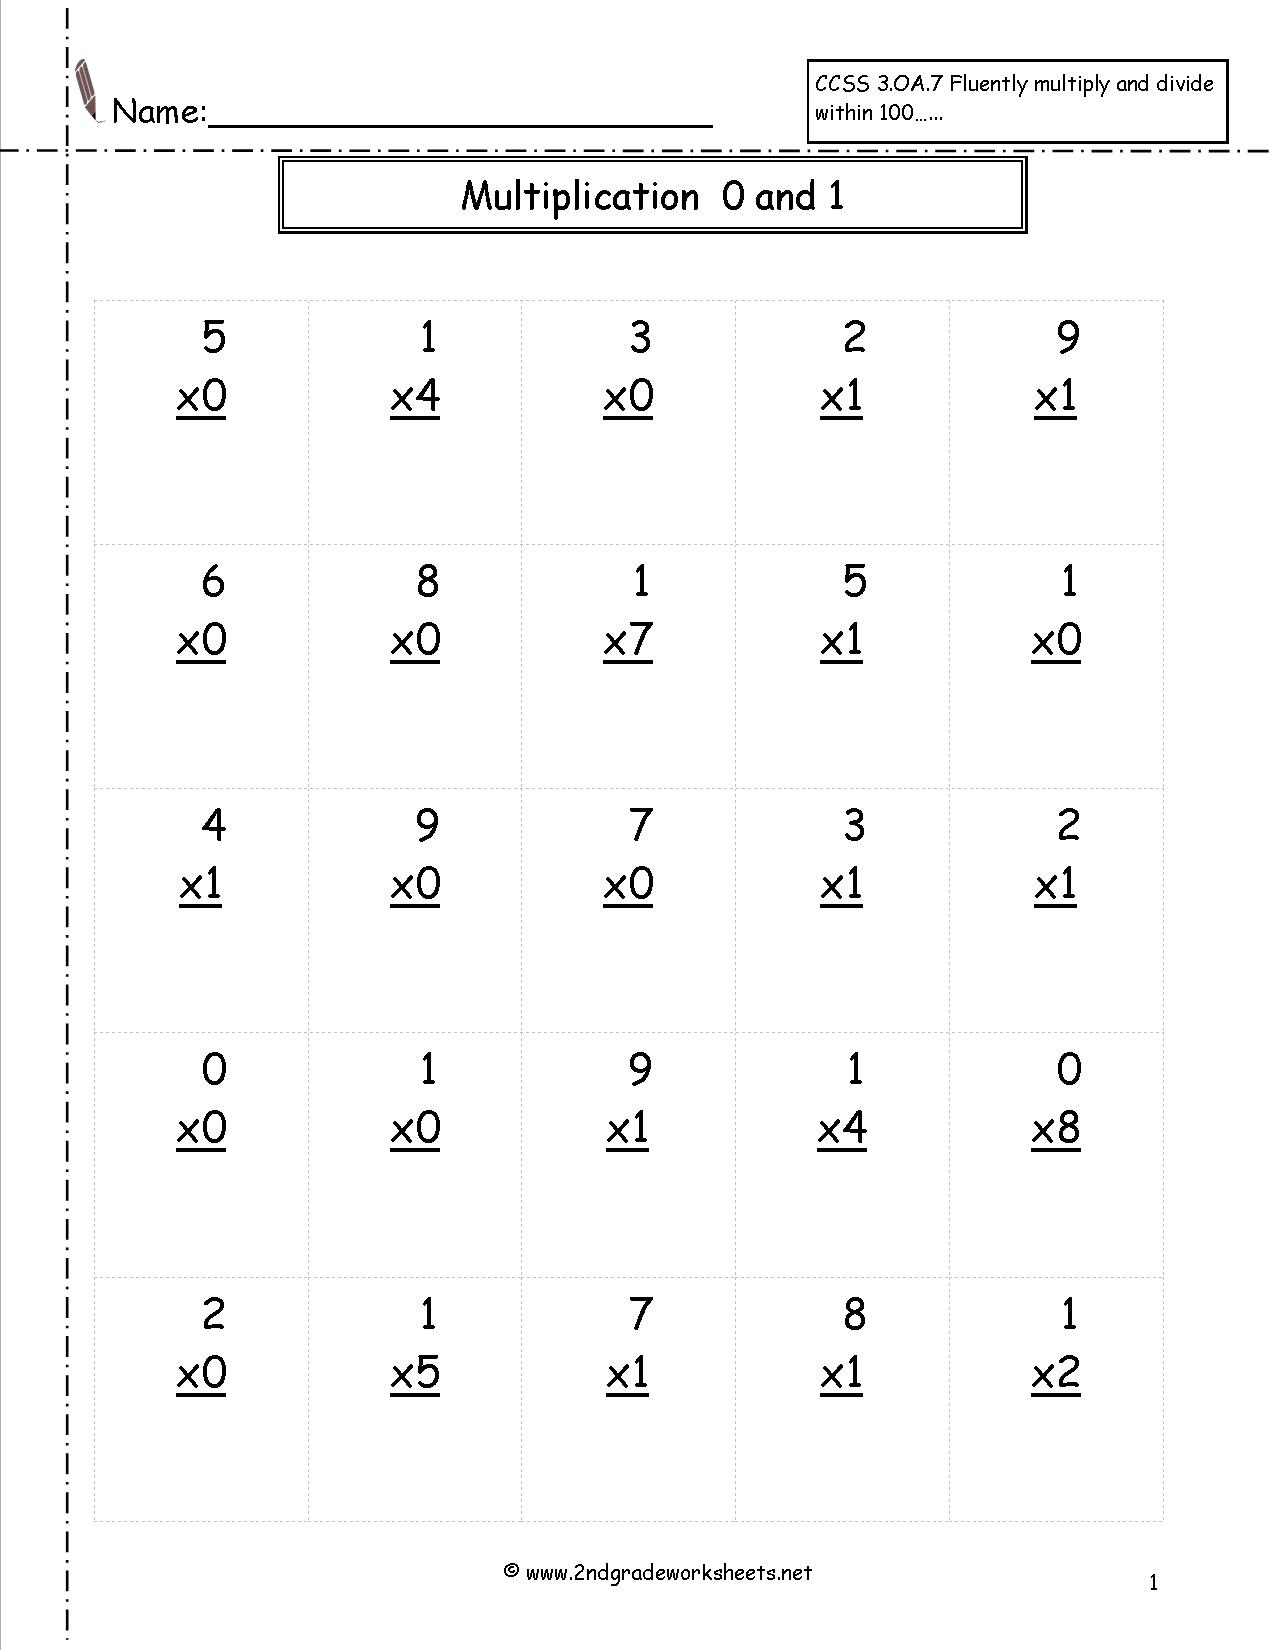 Multiplication Worksheets And Printouts intended for Worksheets About Multiplication